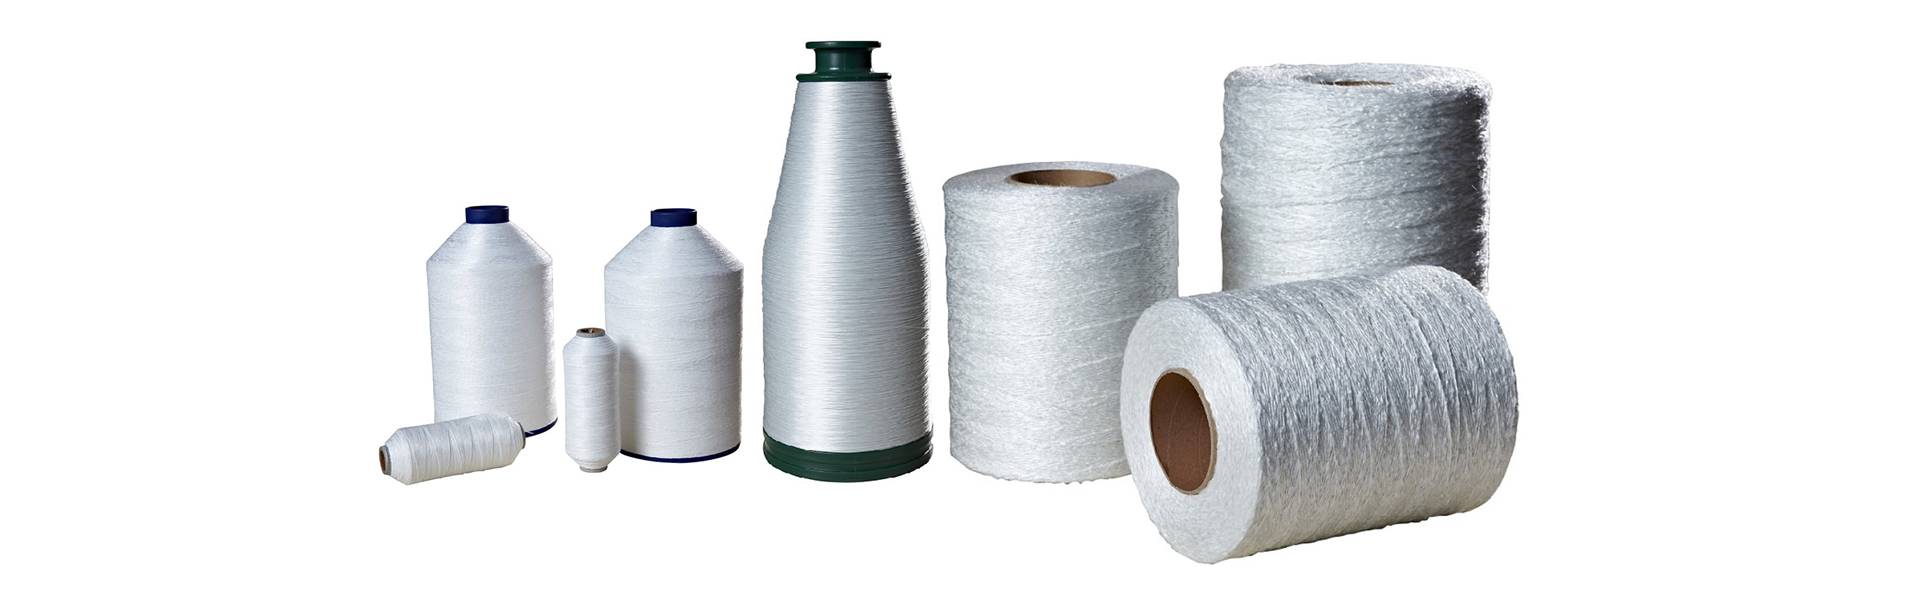 There are various fiberglass yarns with different package methods.